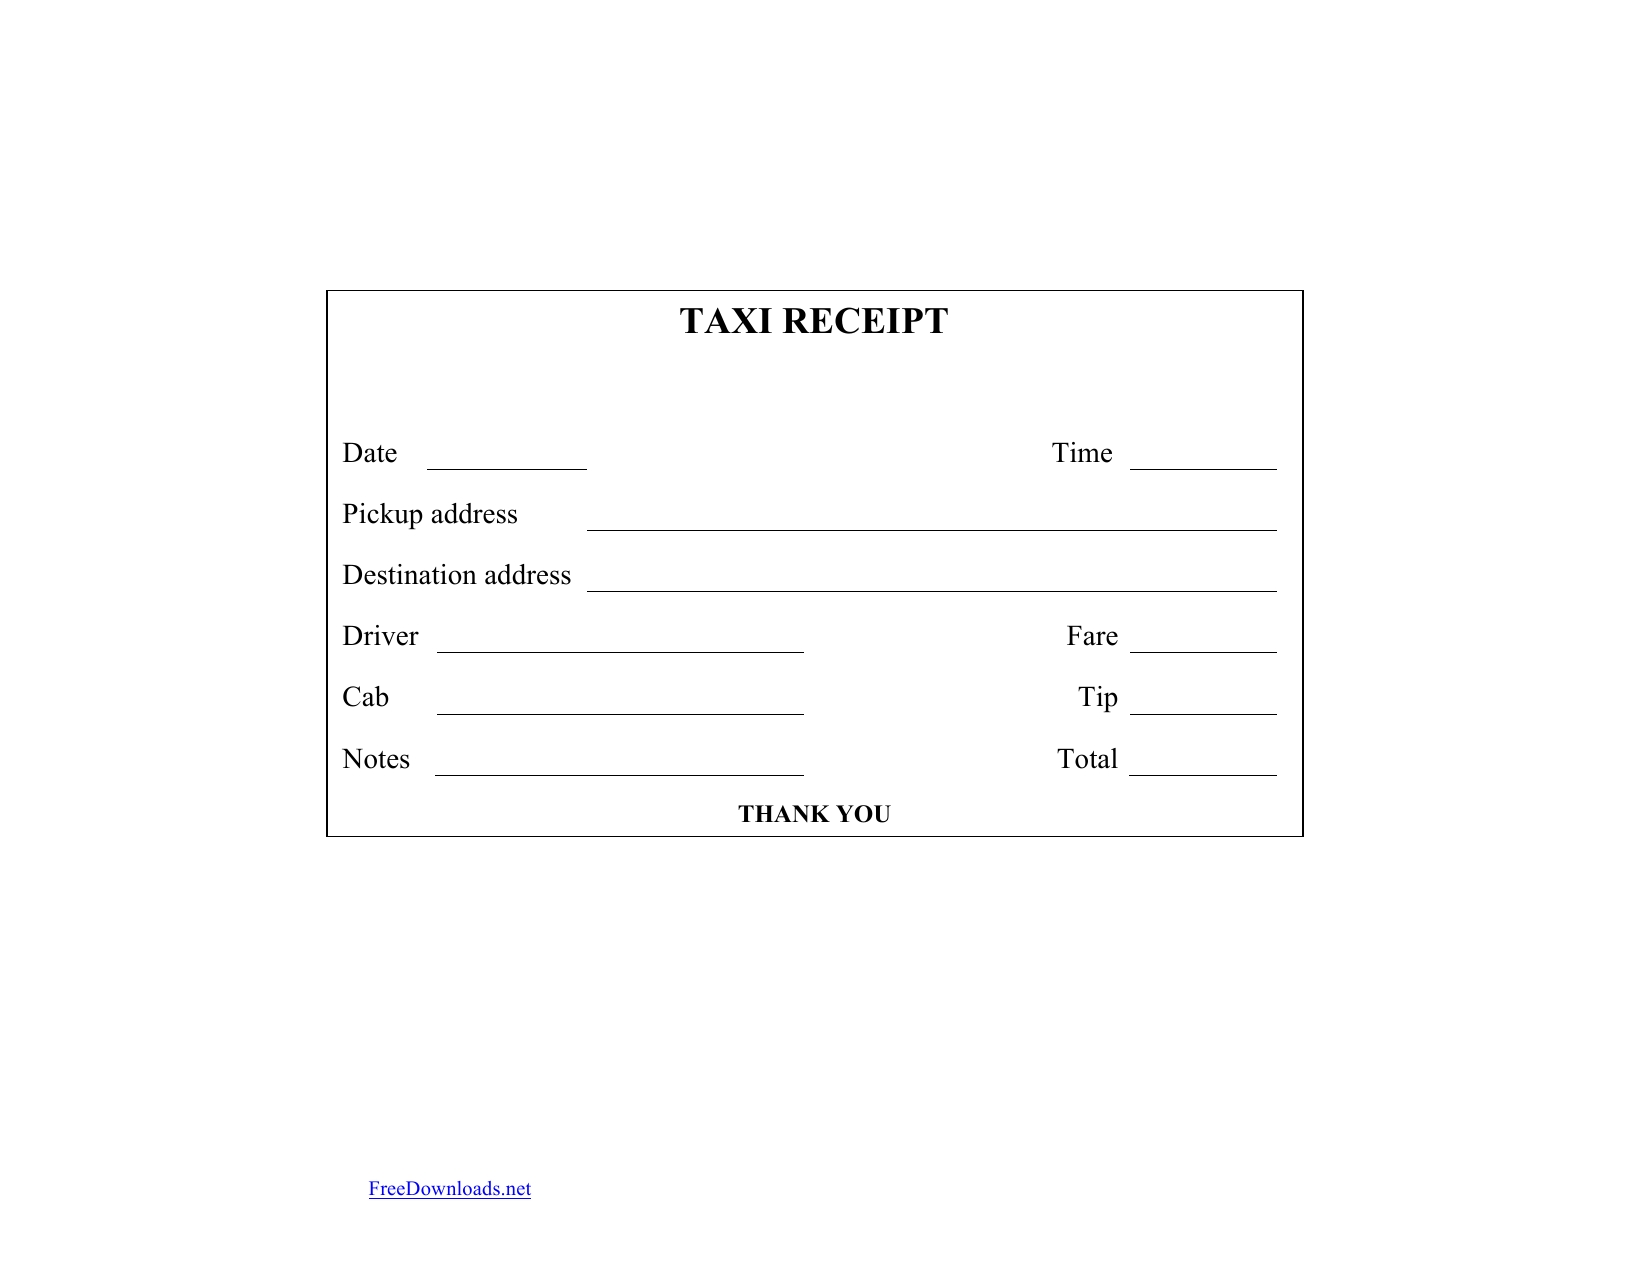 Yellow Cab Taxi Receipt Template